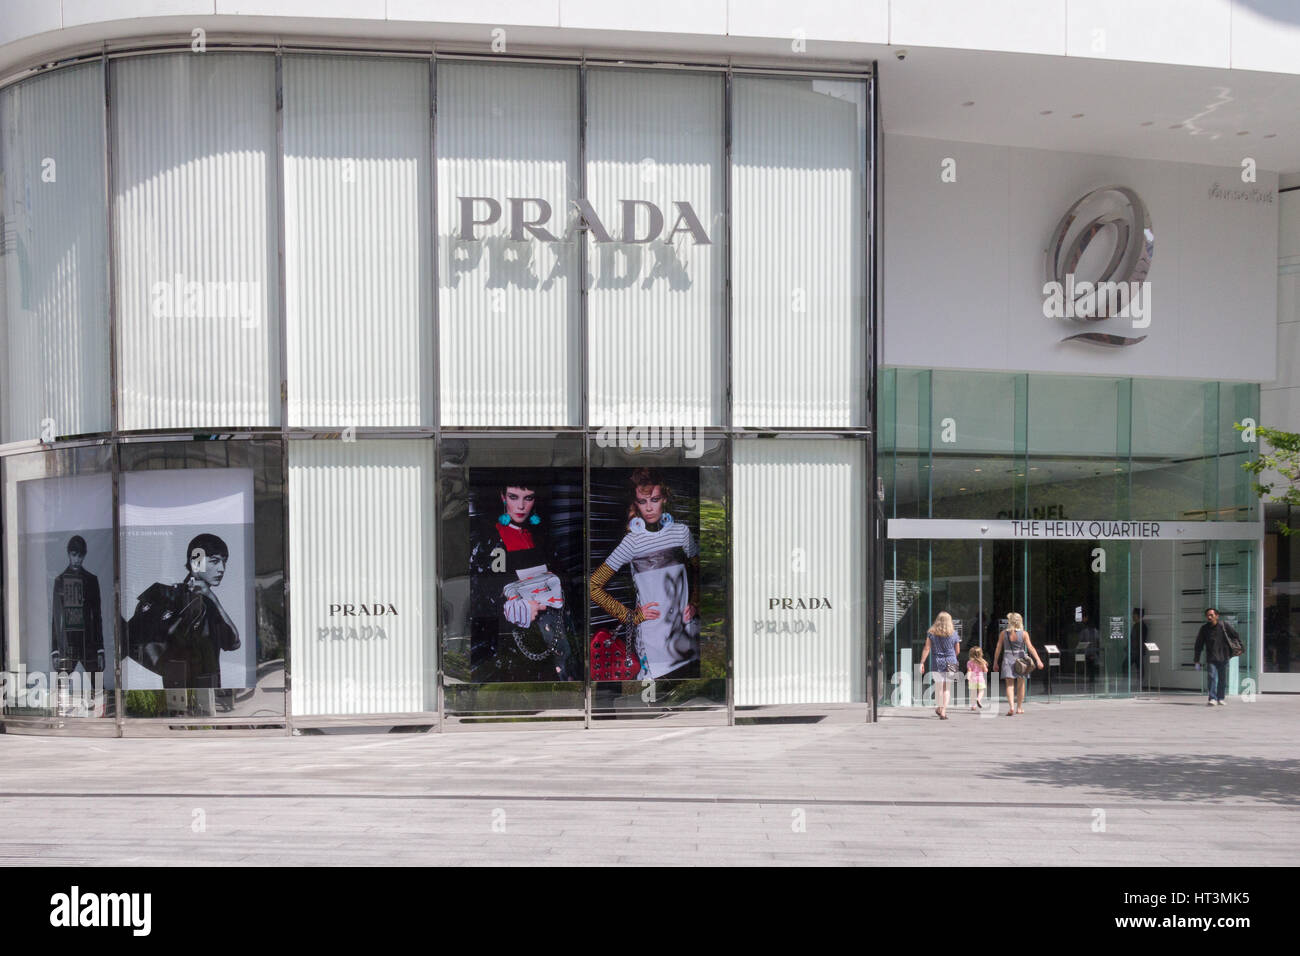 Prada shop and the entrance to the Helix quartier in the Emporium complex  of shopping malls in Bangkok, Thailand Stock Photo - Alamy